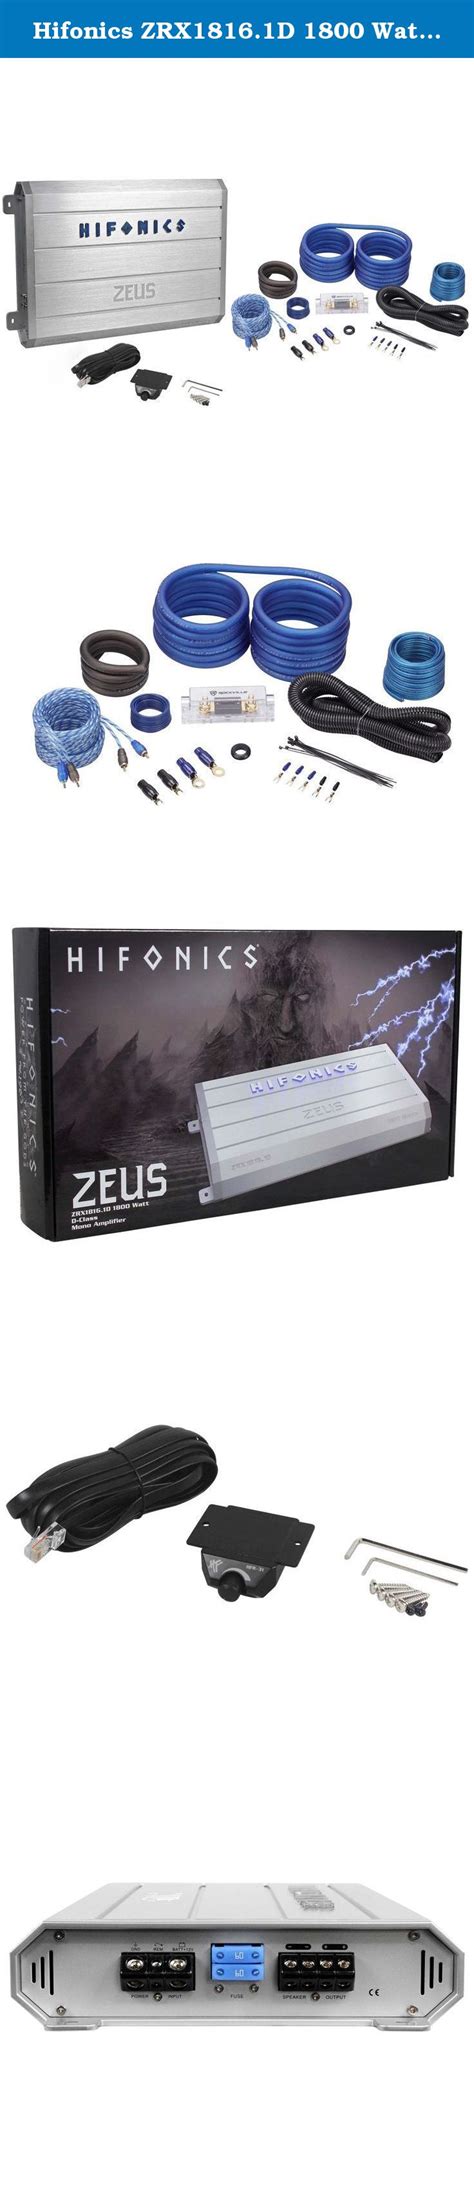 This amp is a class d monoblock with 6000 watts at peak output. Hifonics ZRX1816.1D 1800 Watt RMS Monoblock Amp Class D Amplifier + Wiring Kit. This Package ...